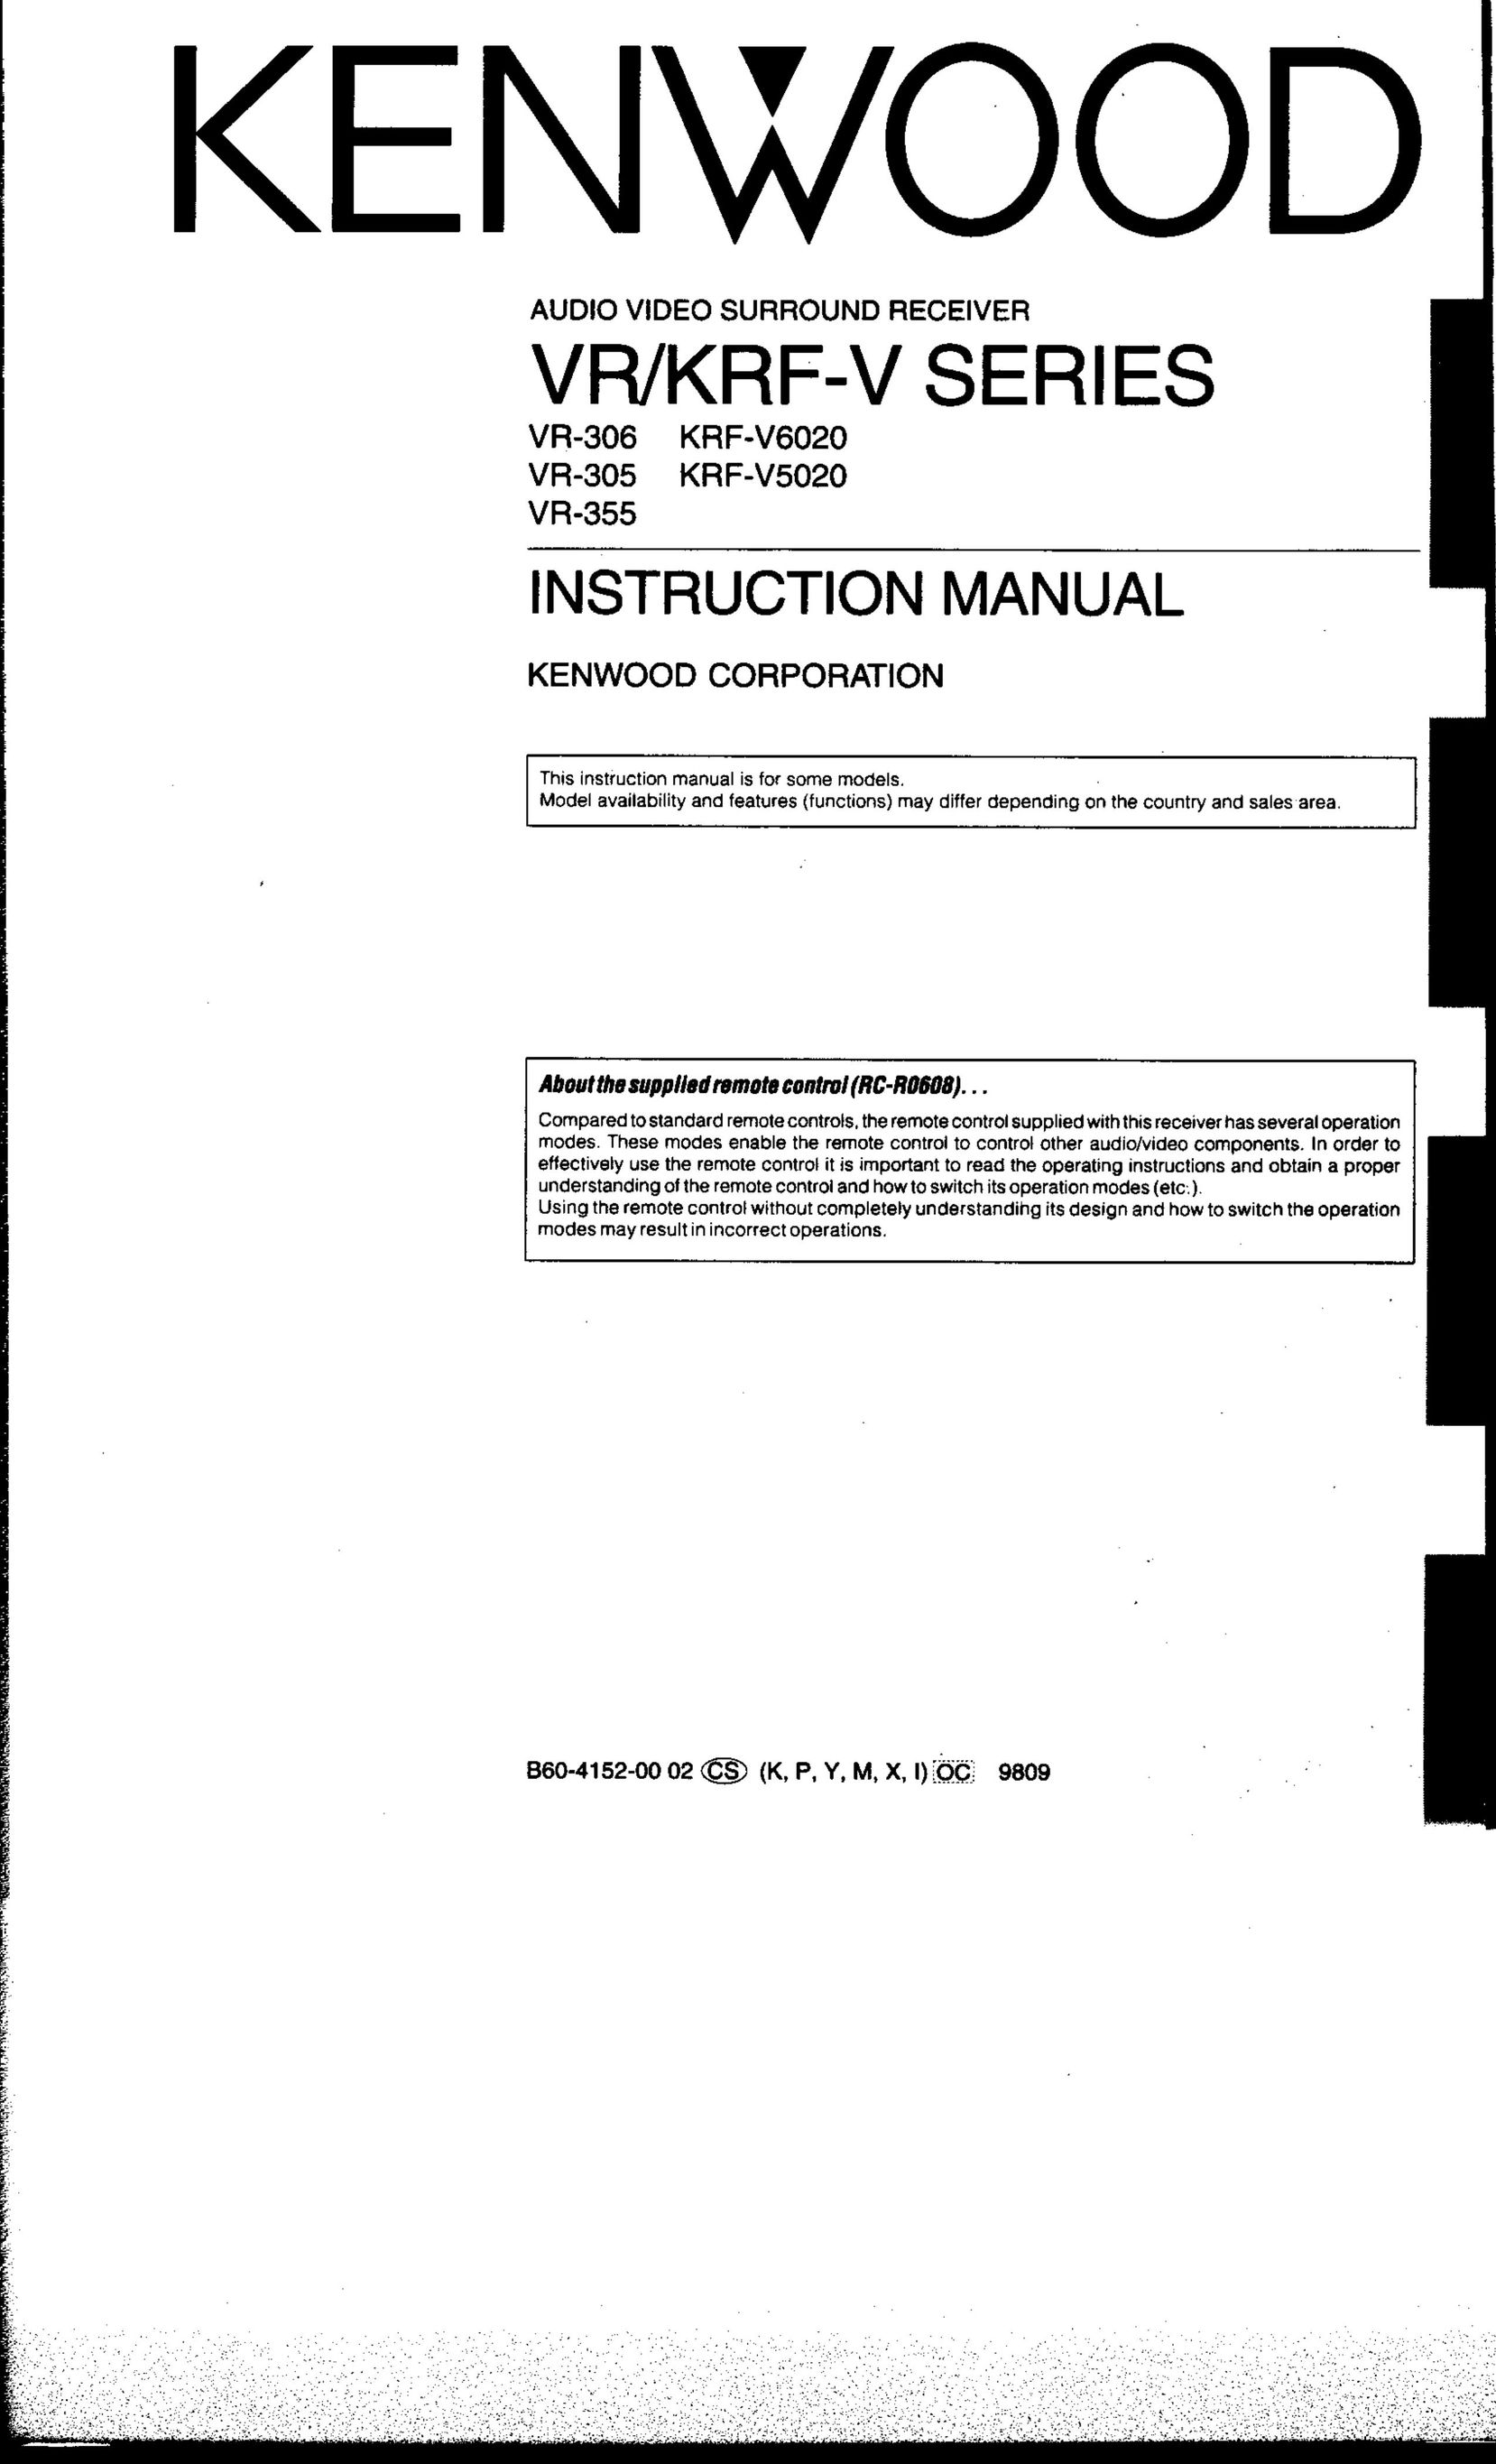 Kenwood VR-306 Home Theater System User Manual